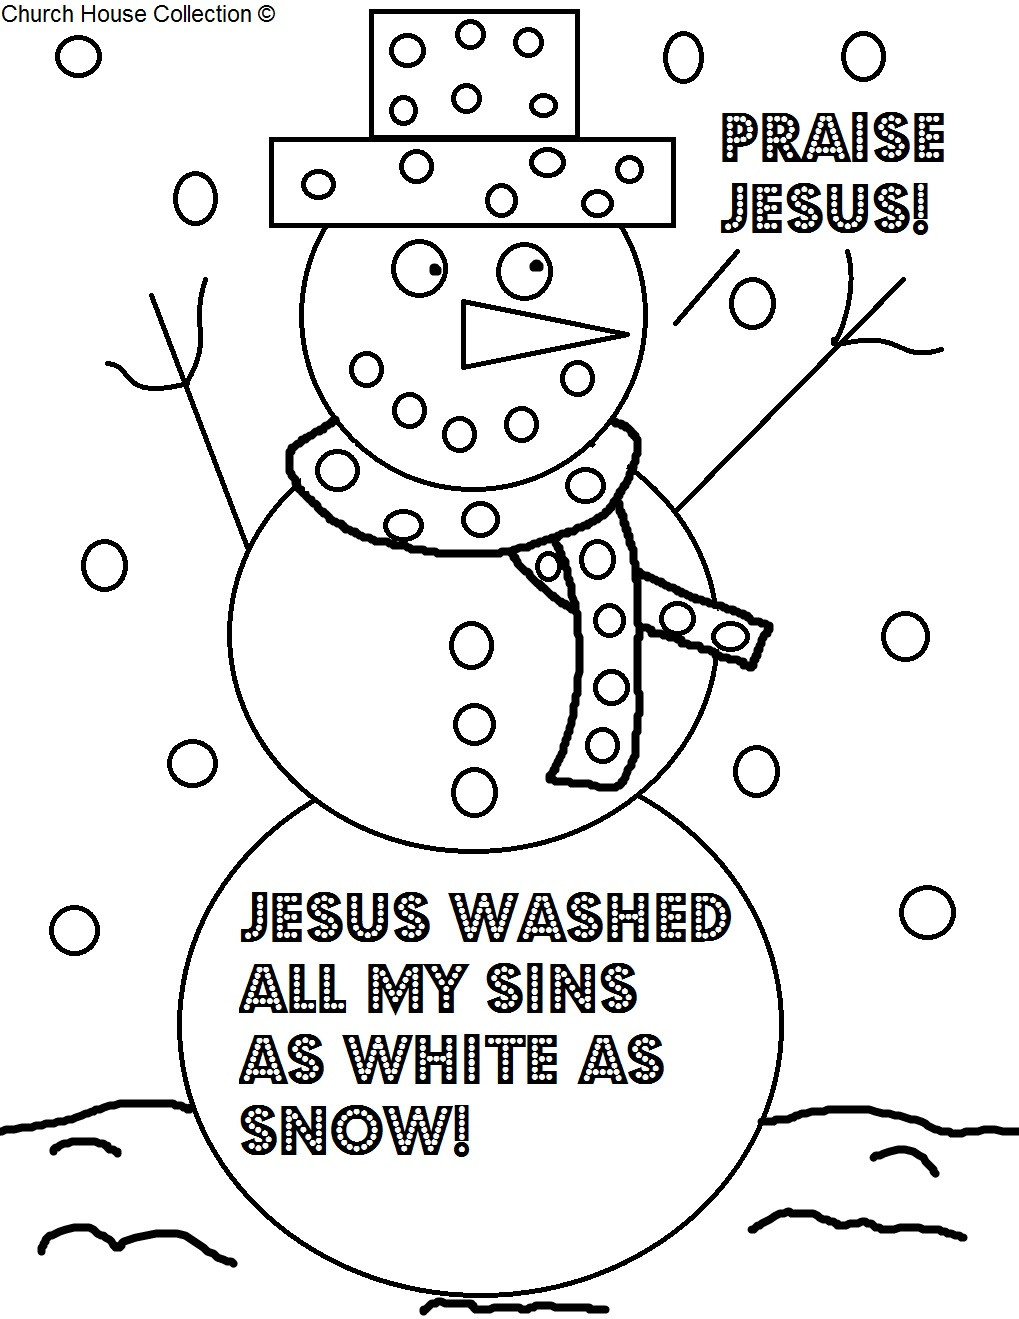 Sunday School Coloring Pages Kids
 Church House Collection Blog Christmas Coloring Page For Sunday School Snowman Praise Jesus